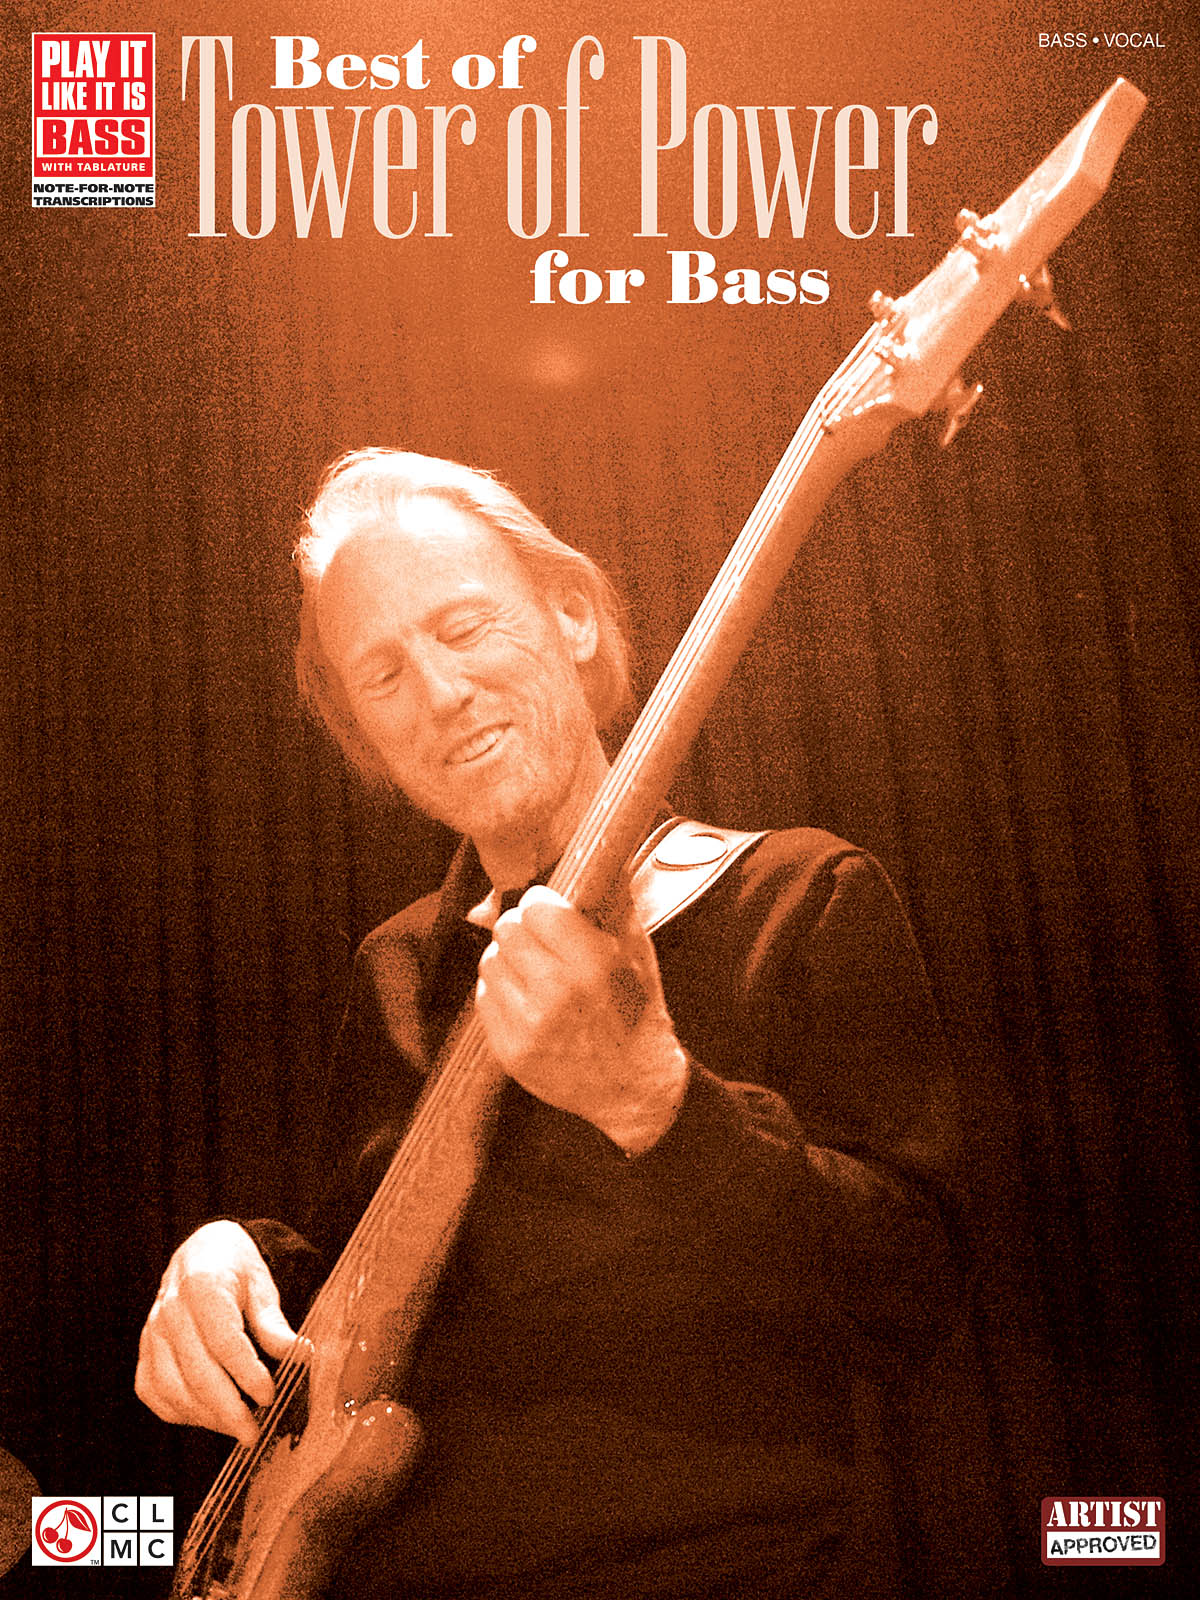 Tower Of Power: Best of Tower of Power For Bass: Bass Guitar Solo: Artist